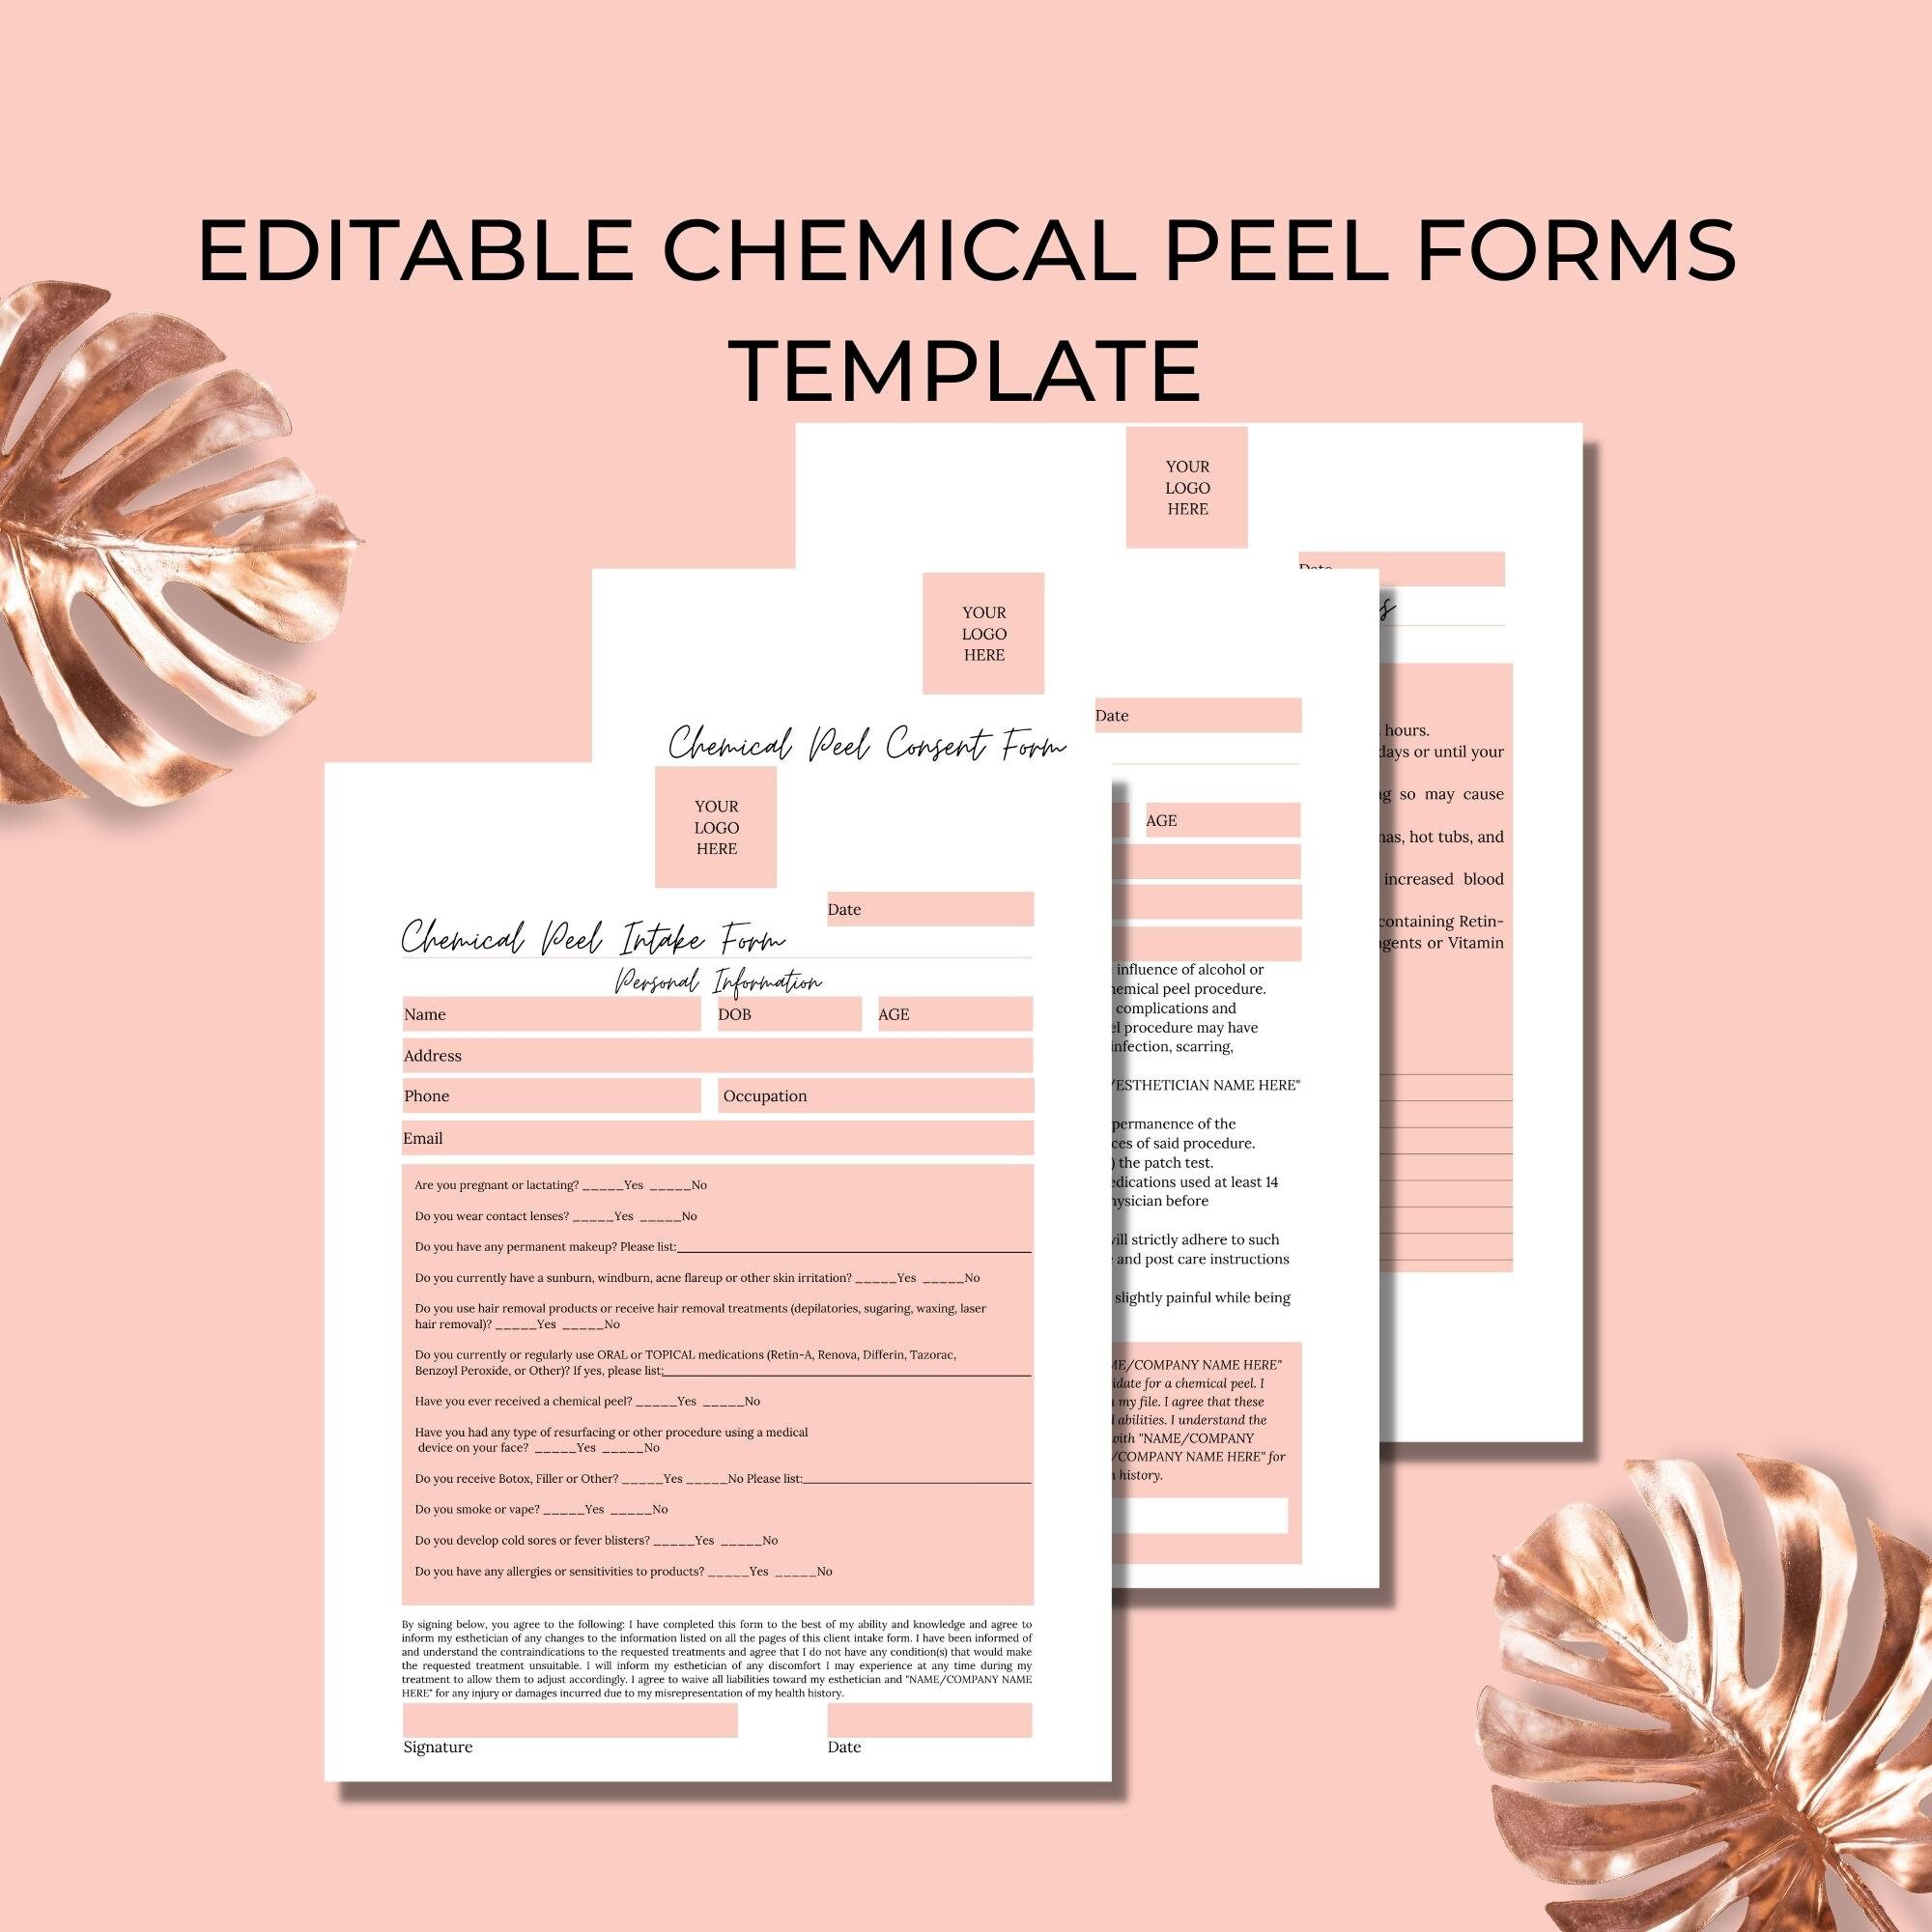 Intake Form 25 Client Intake Forms Aftercare Form 8.5x11 inch Paper Size Form 75 Pack Chemical Peel Consent Form 25 Consent Forms 25 Aftercare Forms 